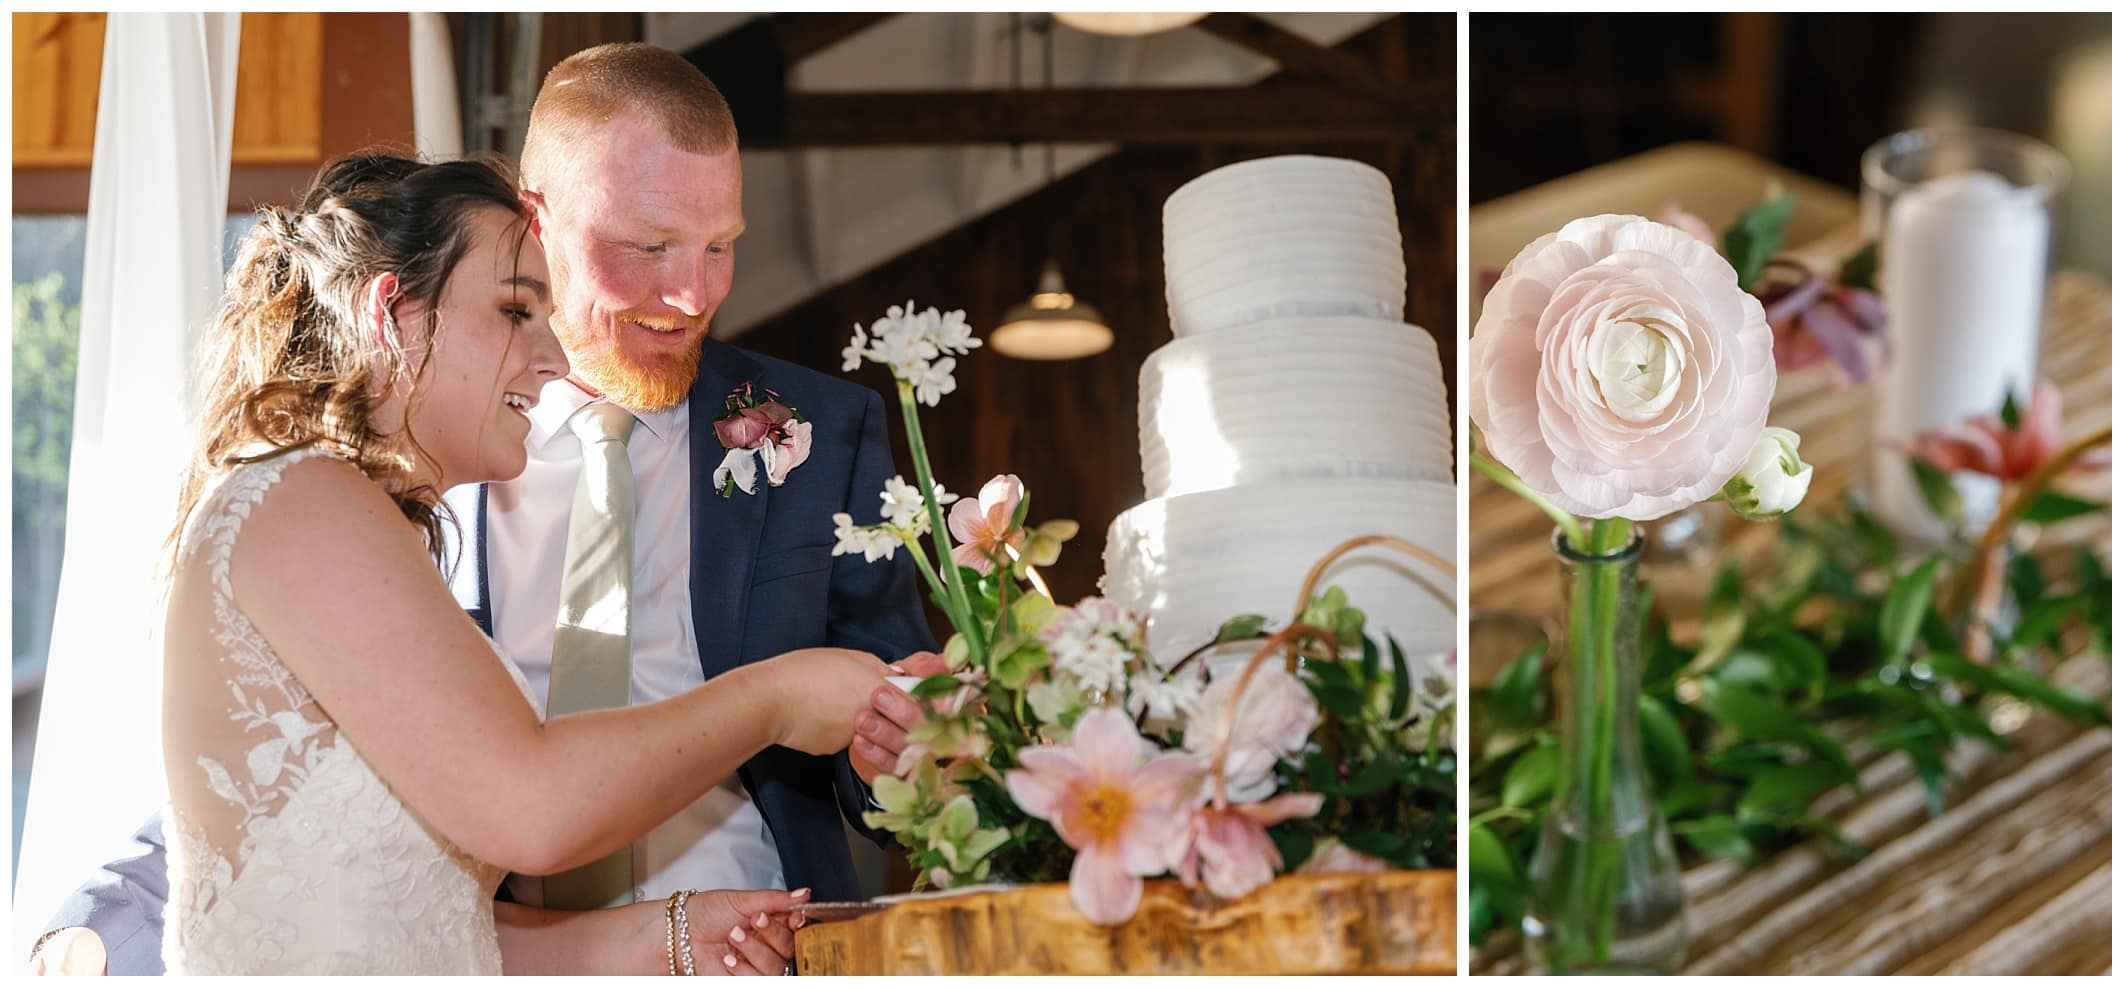 Bride and groom cutting cake surrounded by spring flowers of pink